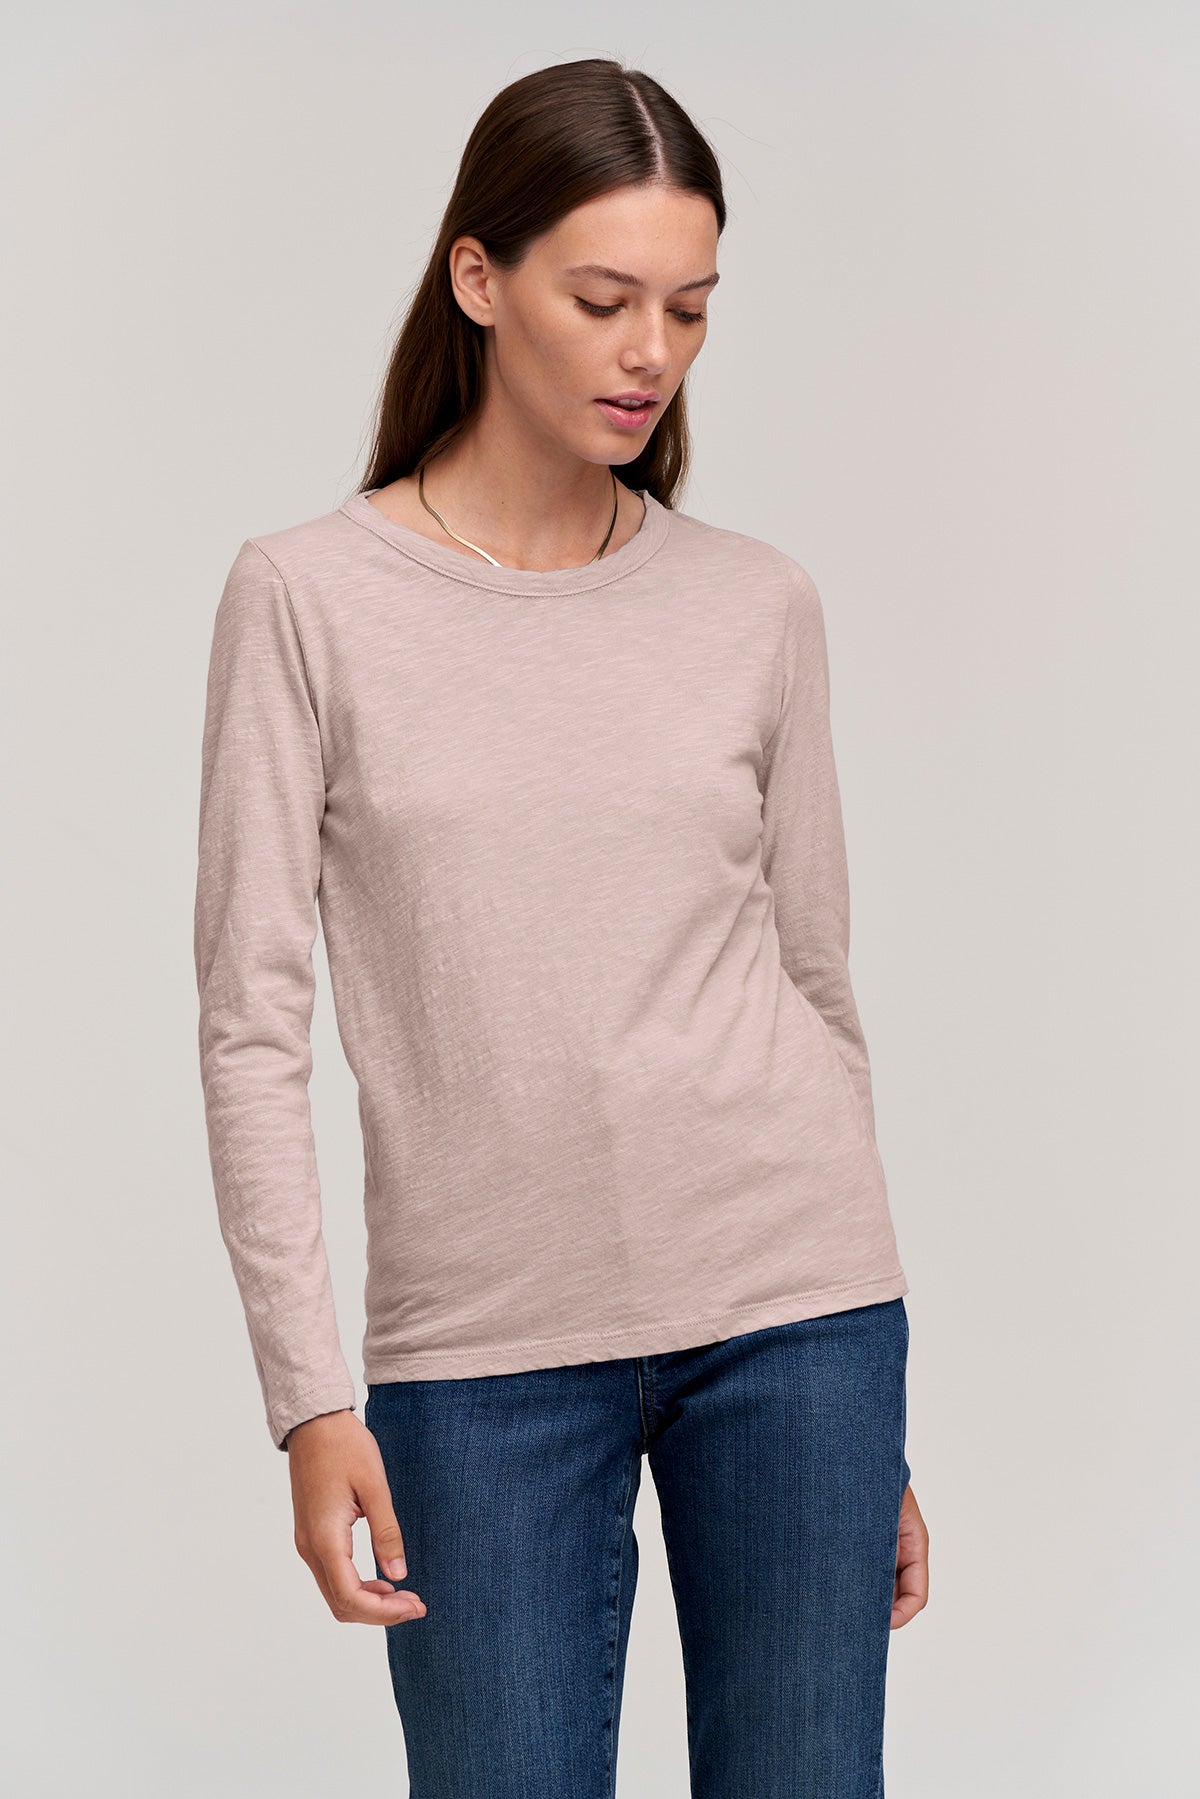 Lizzie Long Sleeve Tee in Rosegold exclusive front view-26630740574401